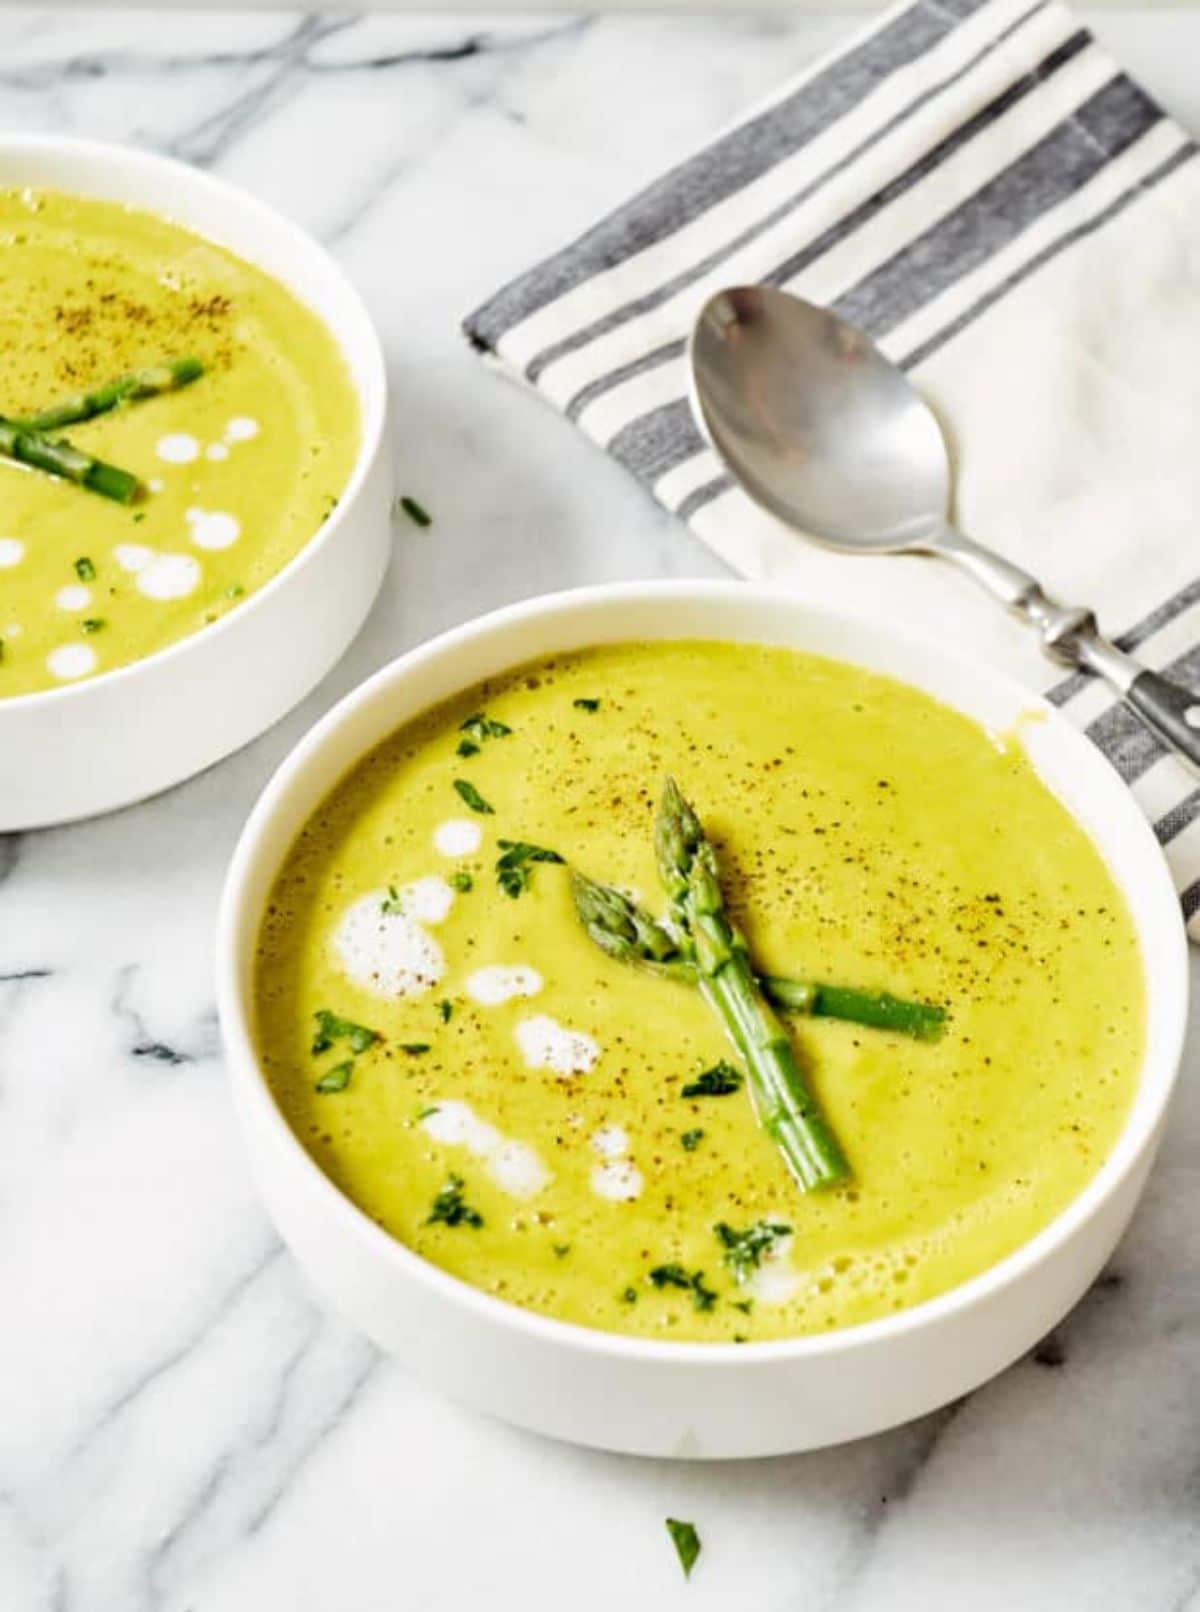 2 white bowls full of yellow asparagus soup, topped with spears of asparagus and herbs